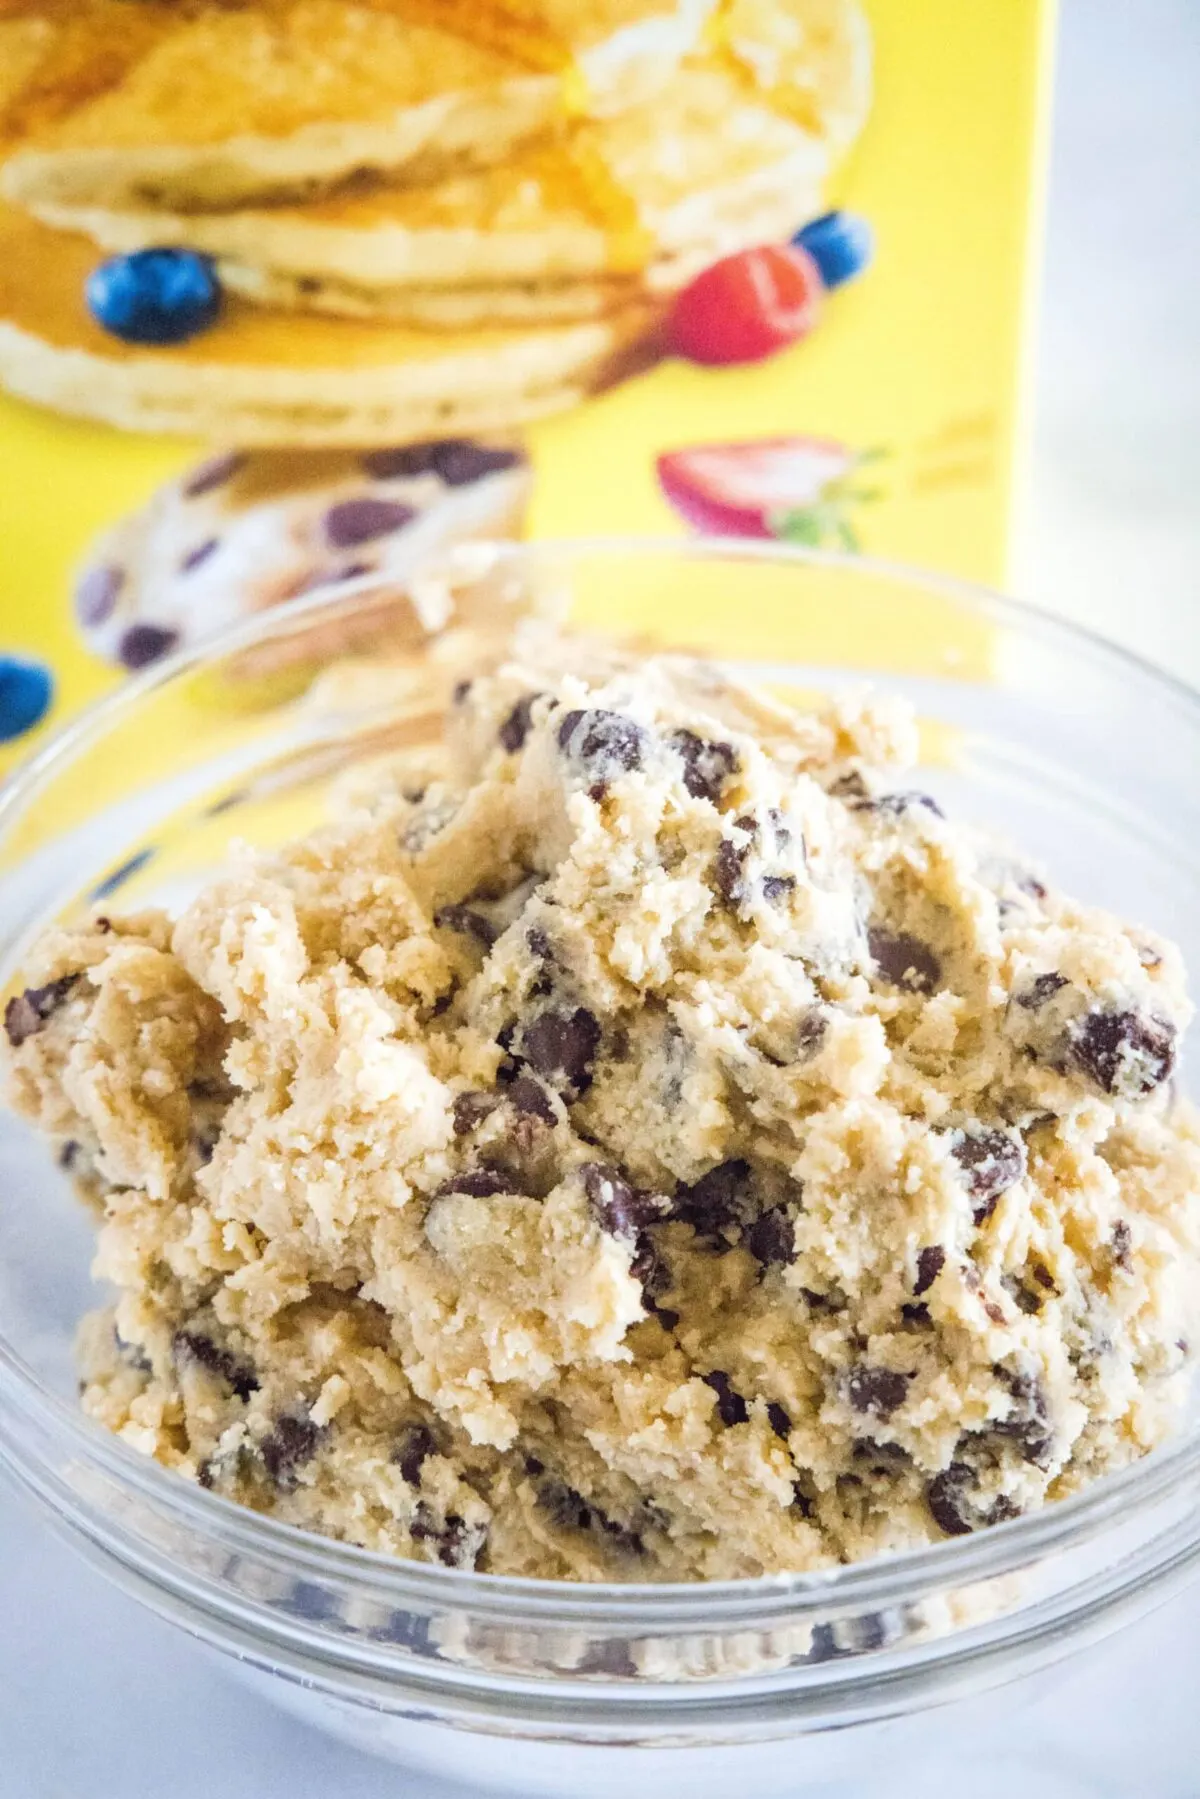 A mixing bowl full of chocolate chip cookie dough in front of a box of Bisquick